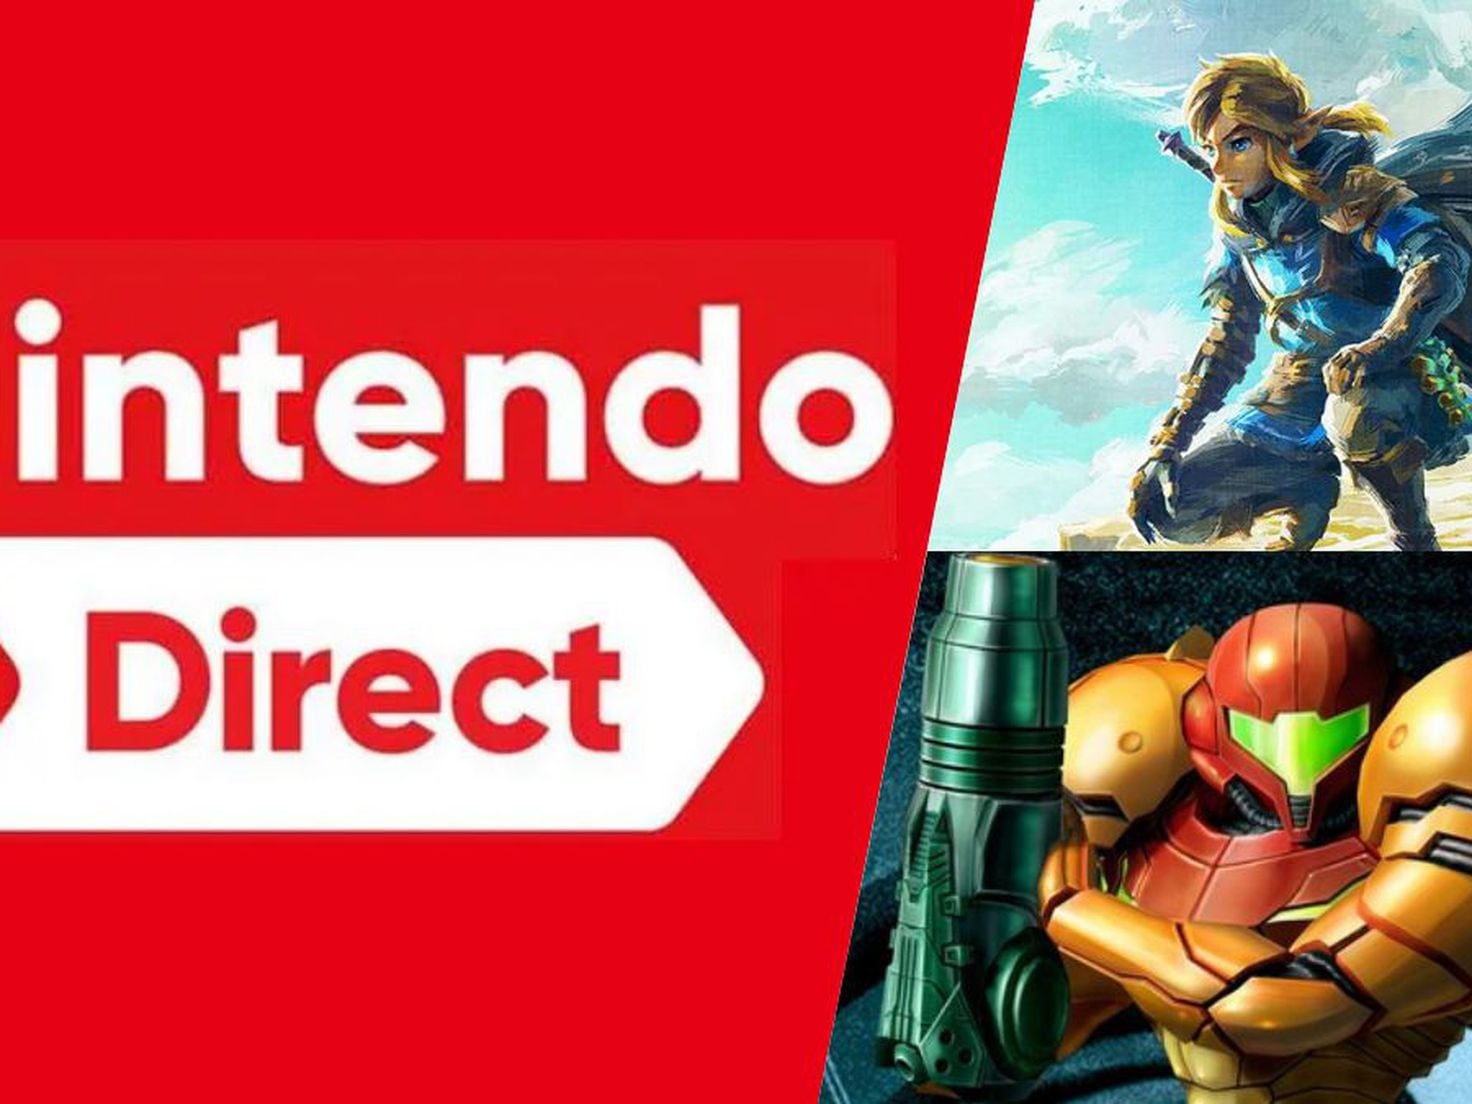 Nintendo Direct February 2023: All the Major Announcements and Trailers